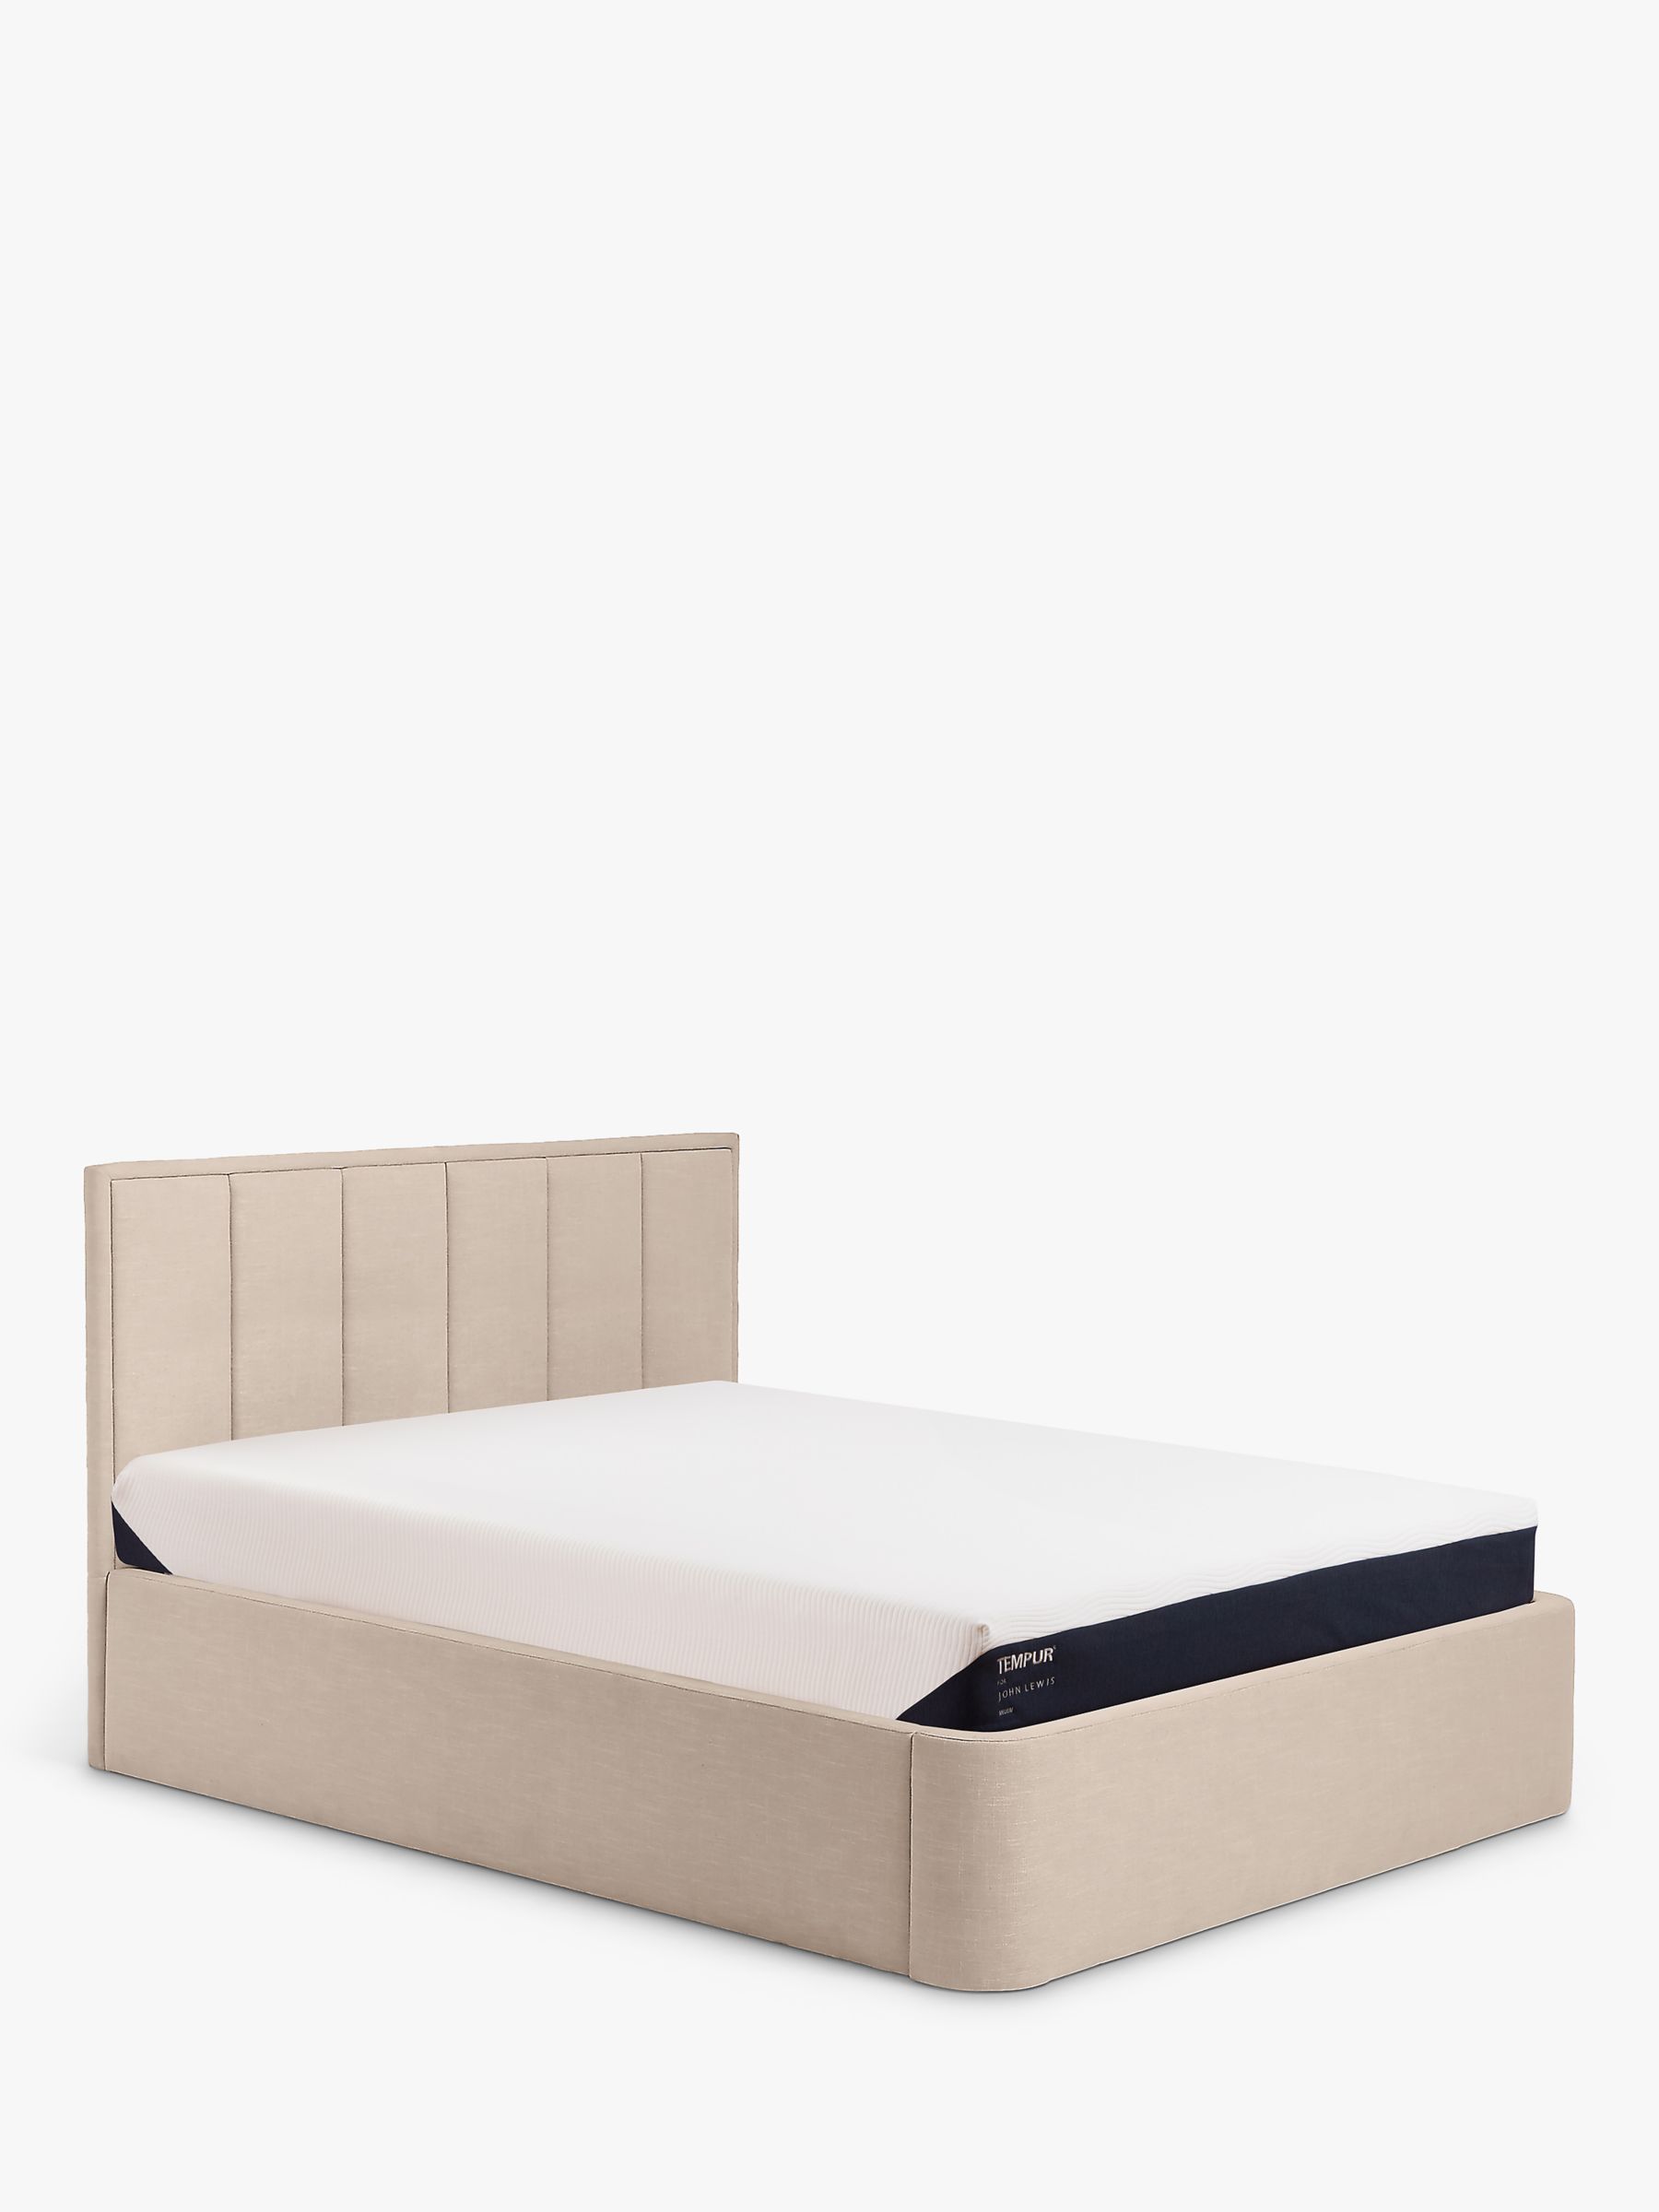 Photo of Tempur® luxe ottoman storage upholstered bed frame double